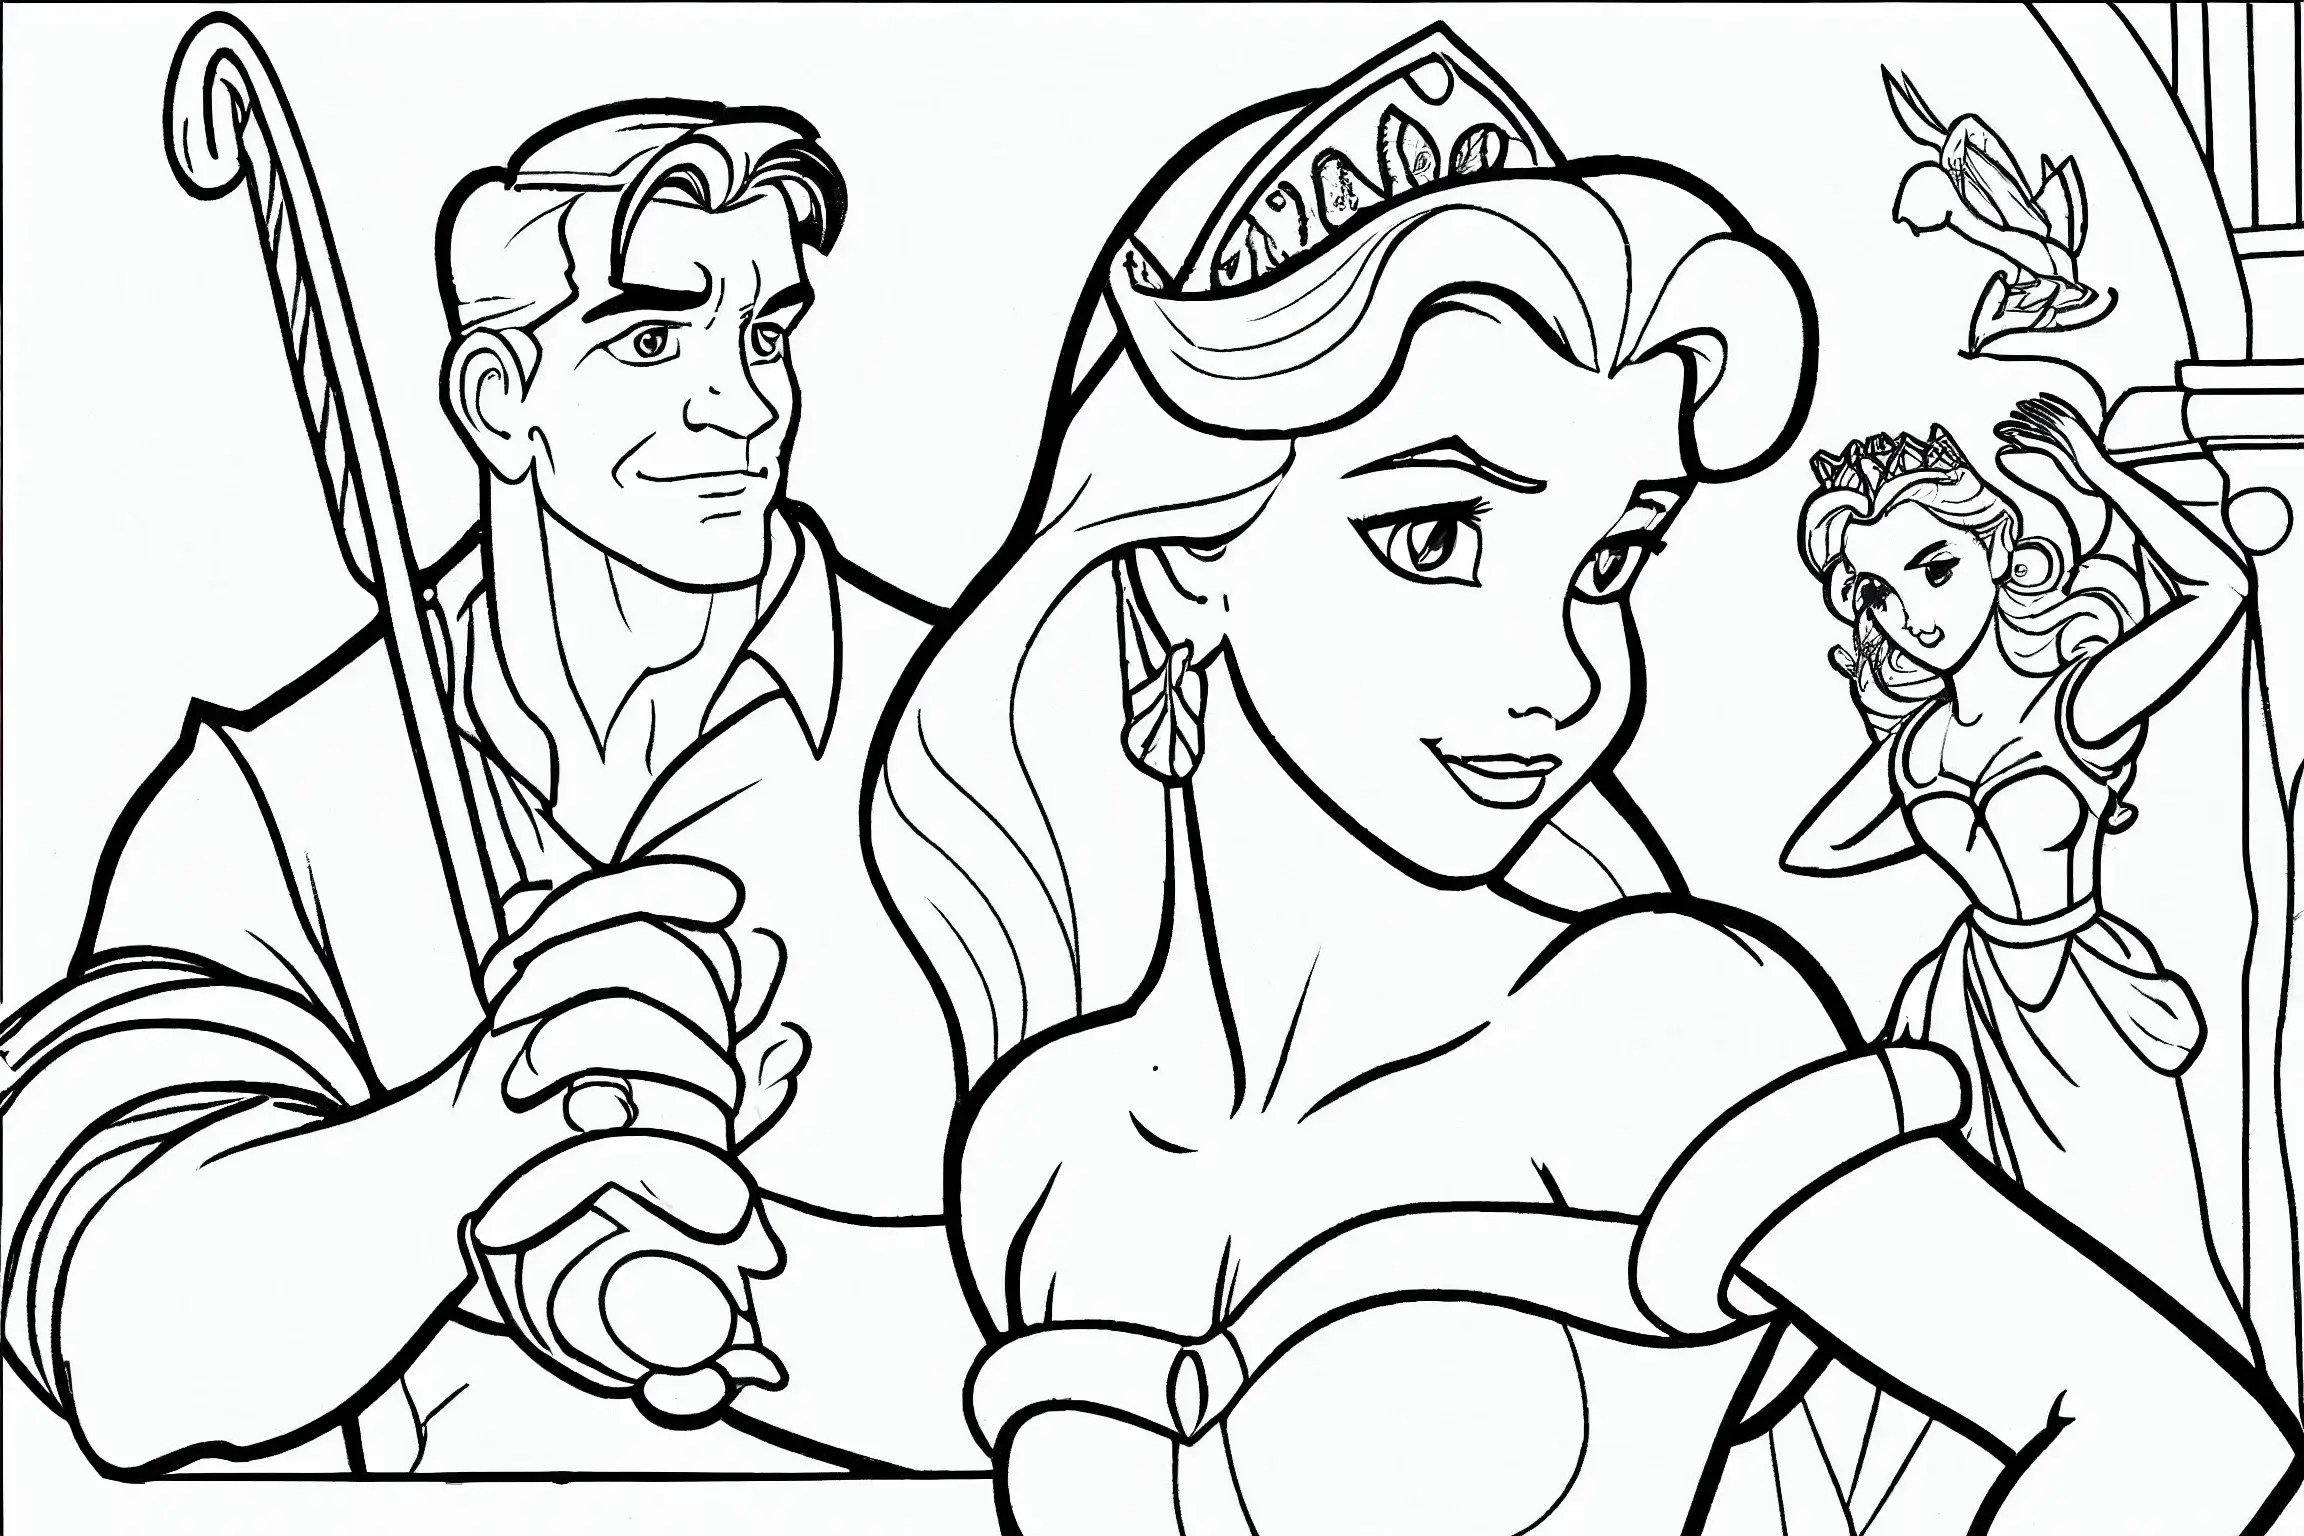 Fine Motor Skills and Disney Coloring Pages